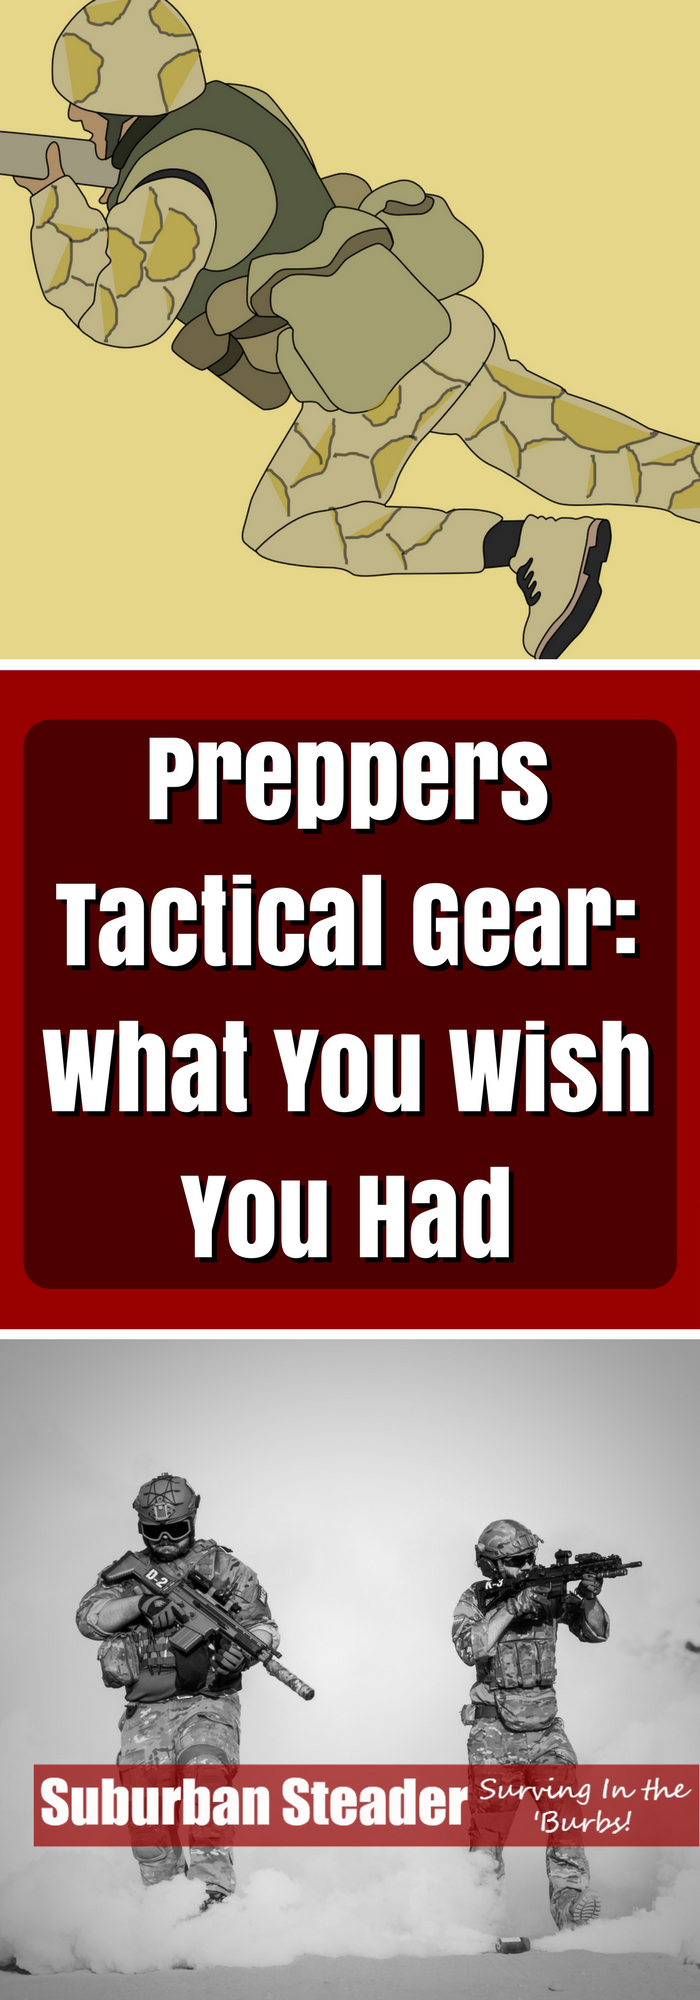 Tactical Gear for Preppers - What You Wish You Had